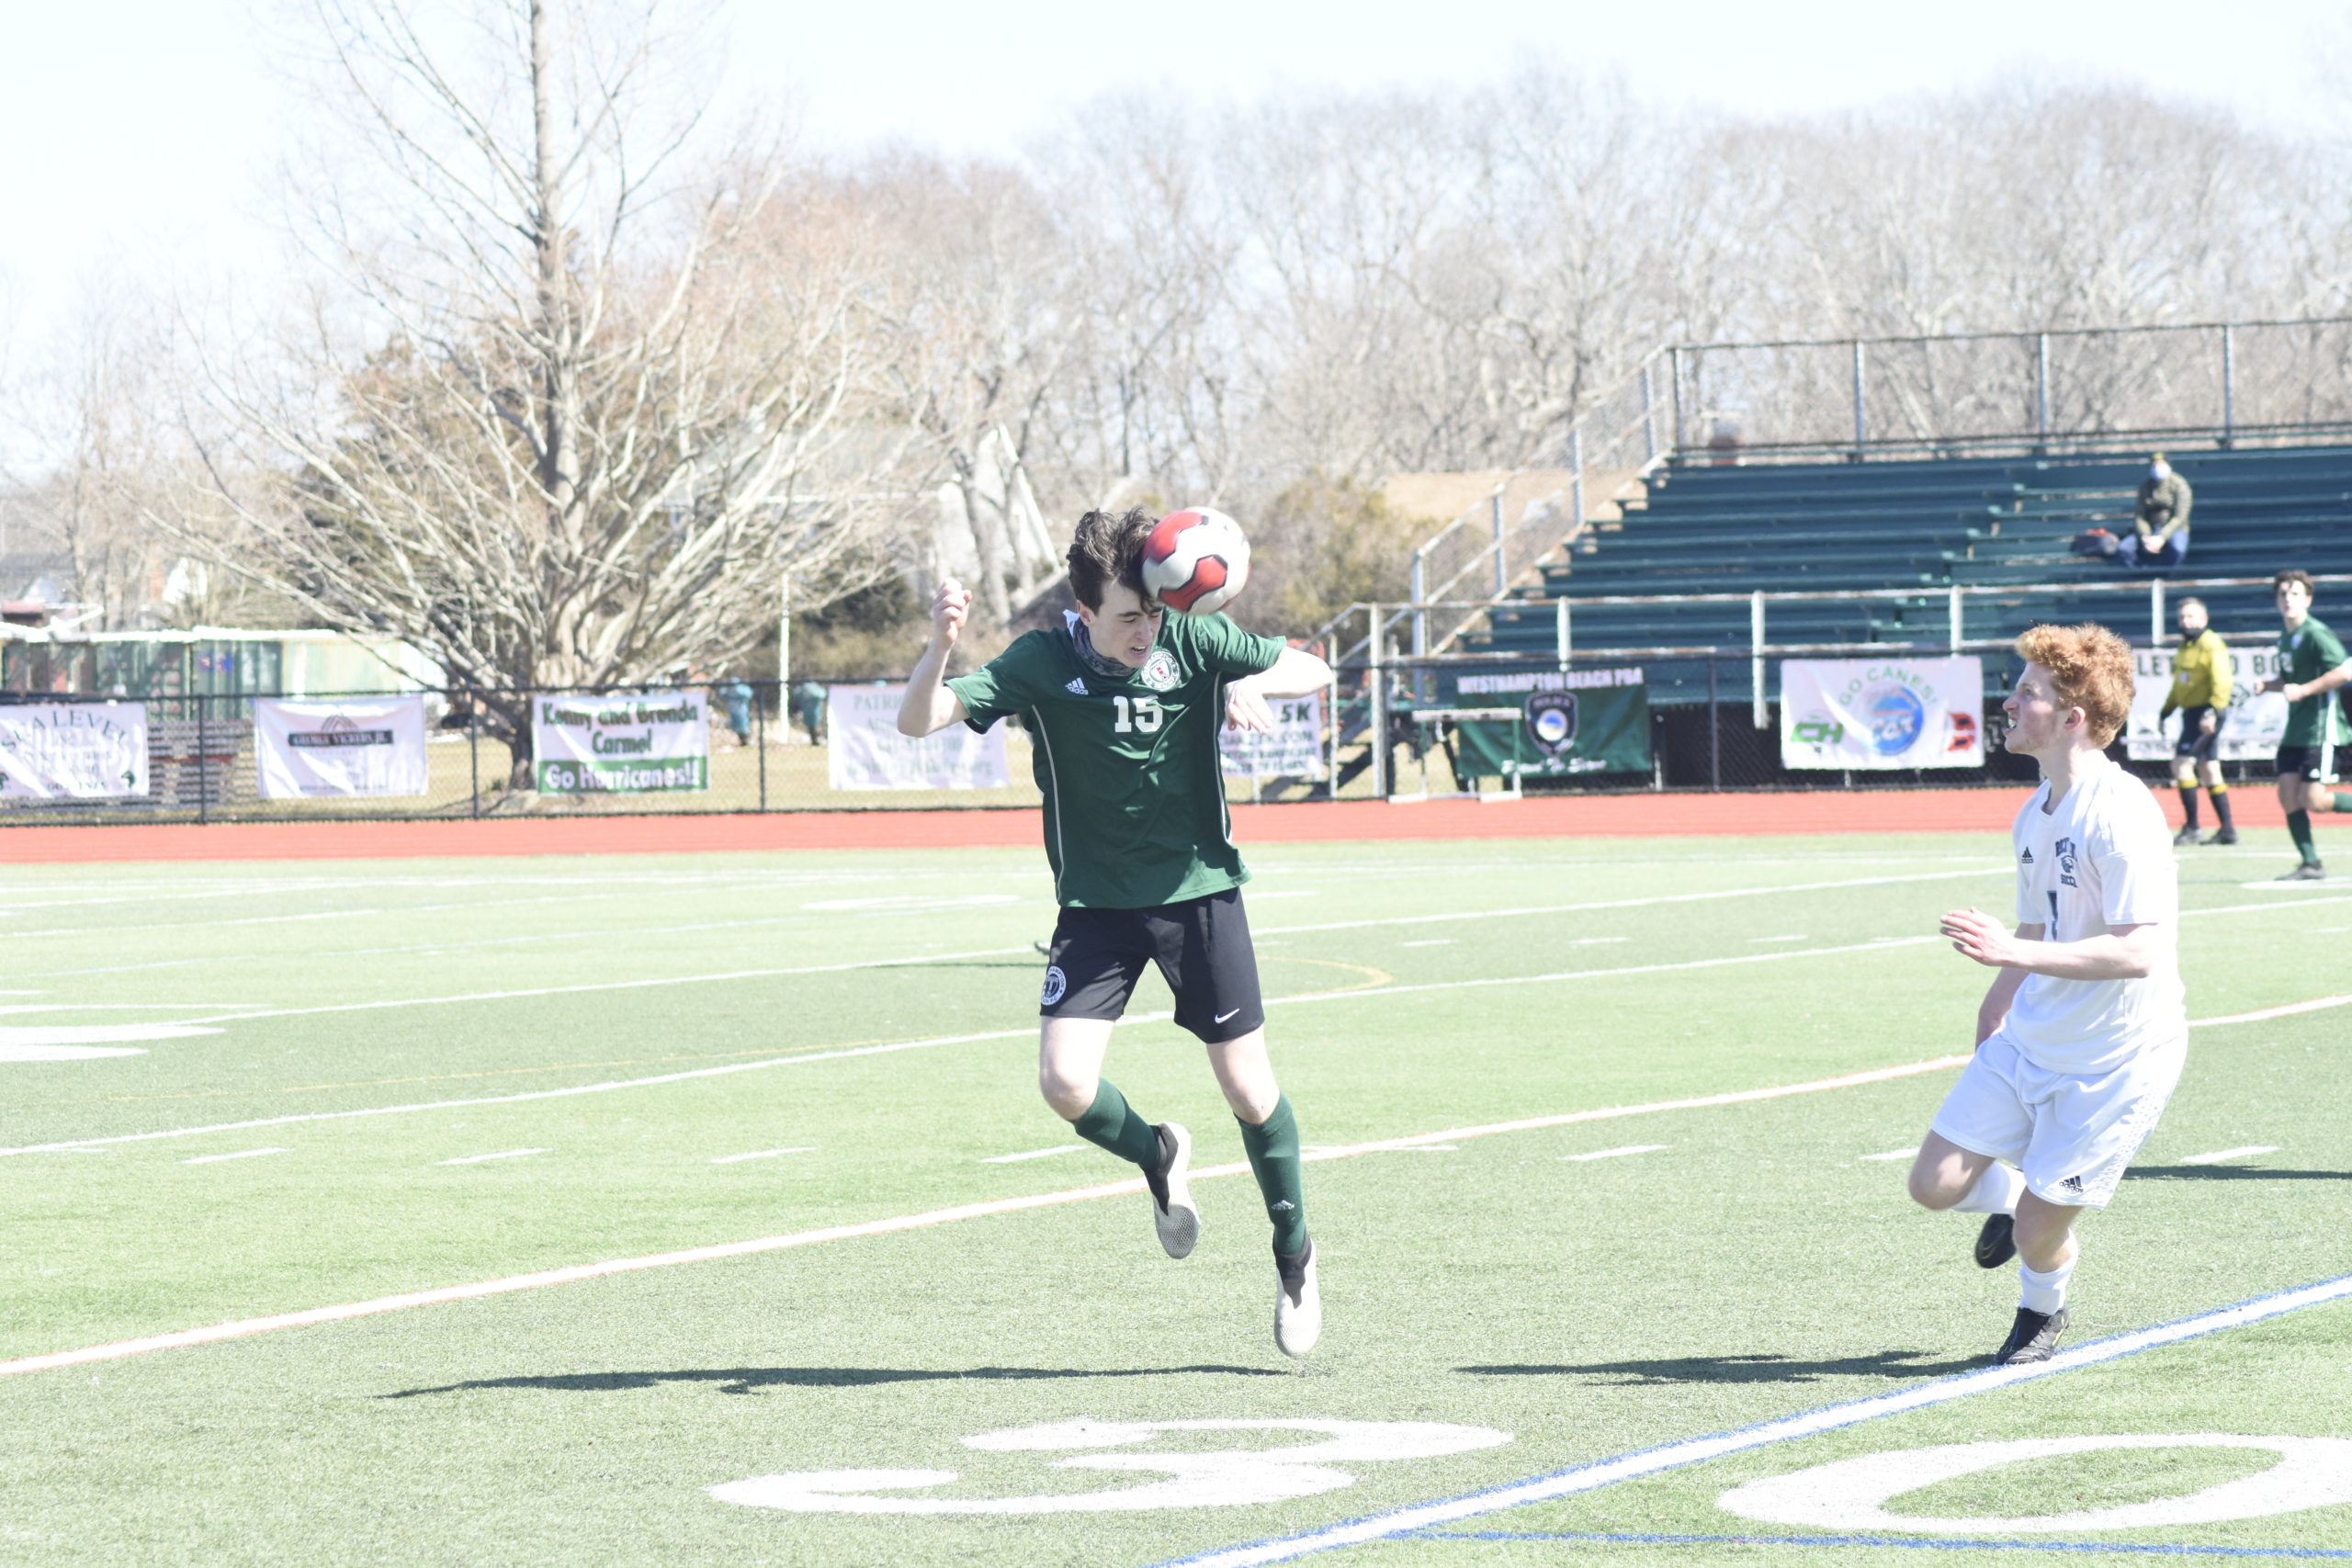 Aidan Kellachan is another returning player for Westhampton Beach.